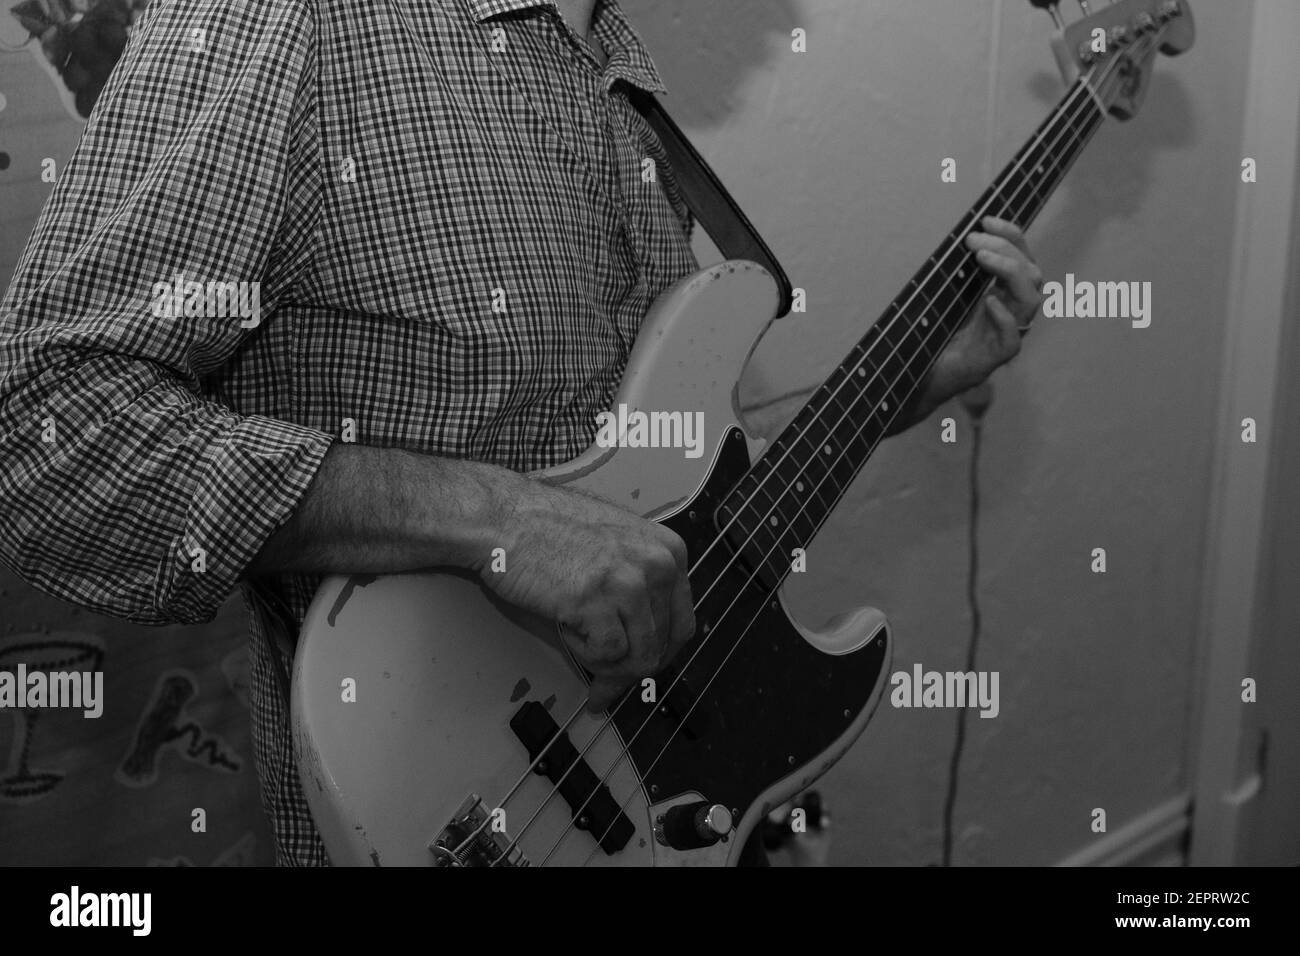 A man playing a Fender Jazz bass guitar in a music rehearsal room Stock Photo